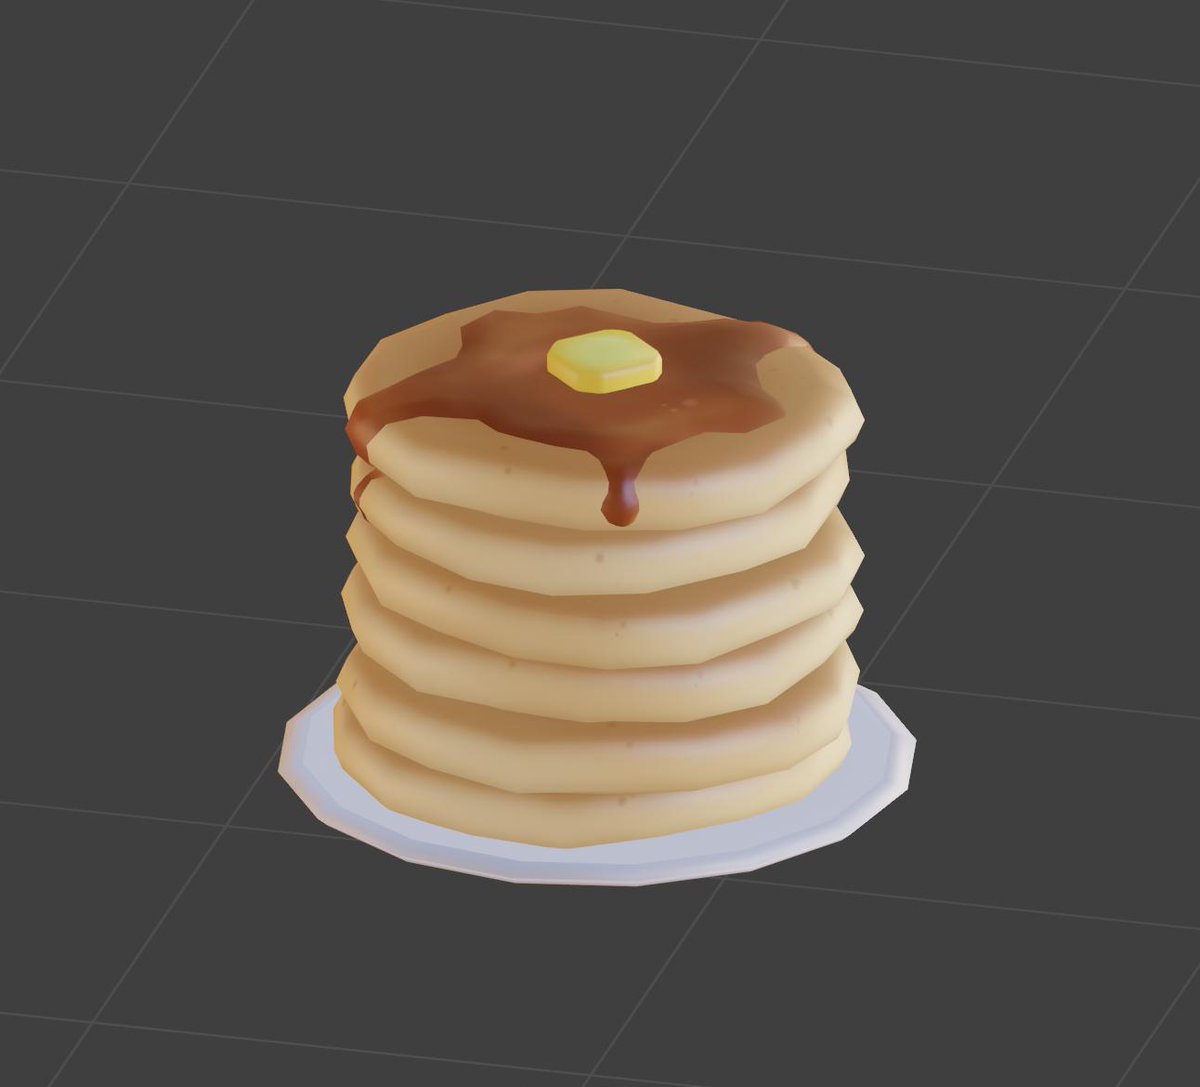 Dani On Twitter Hello I Made This Pancake Hat Over The Weekend